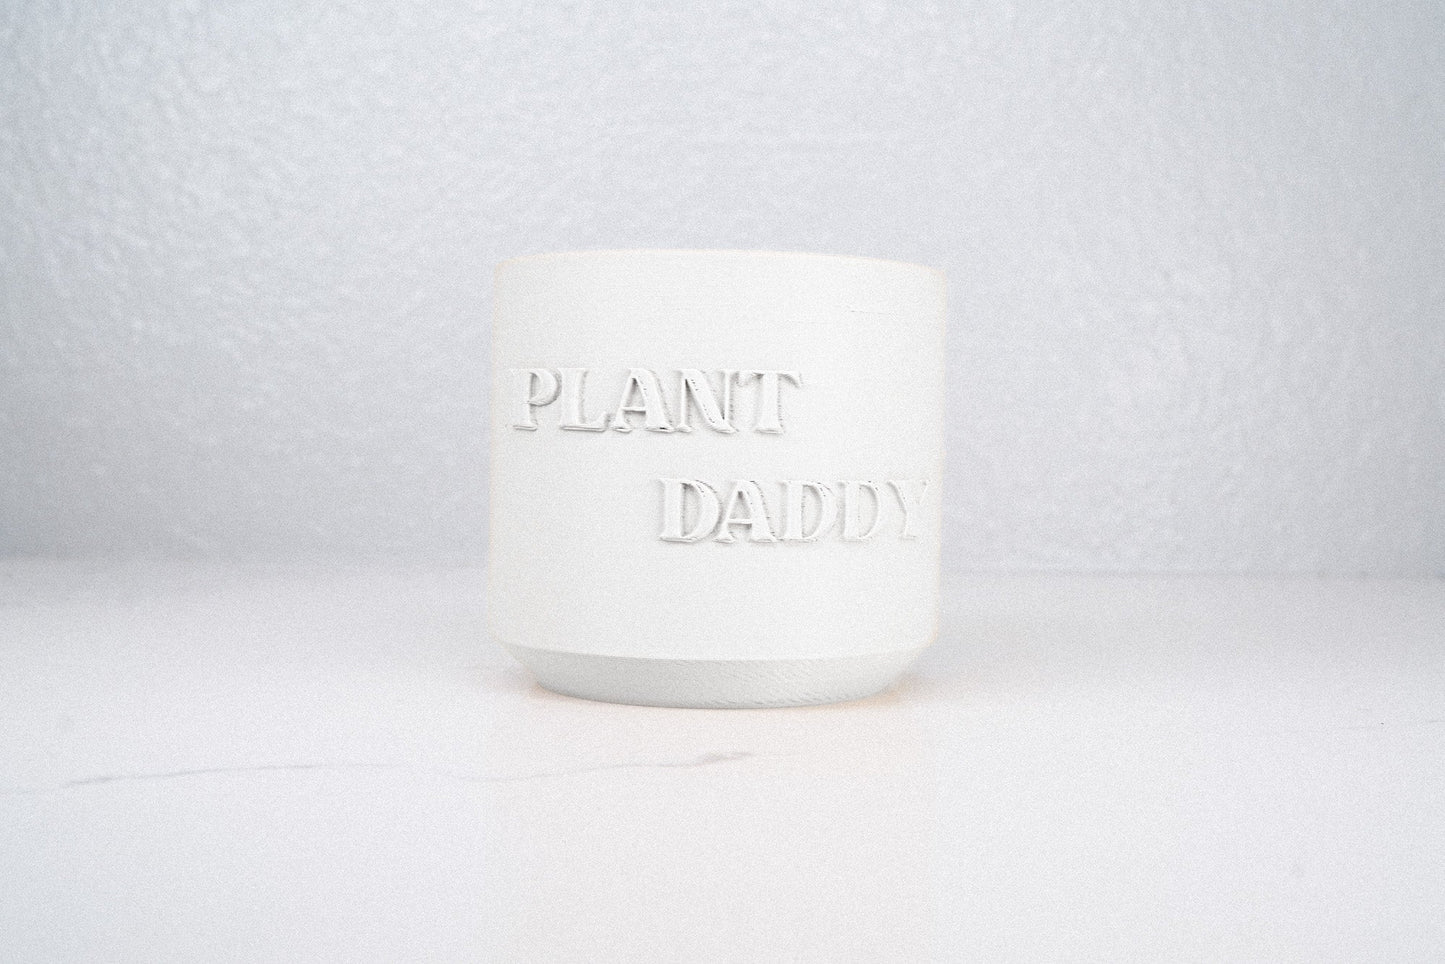 Plant Daddy Planter - Rosebud HomeGoods 4 Inch White With Drip Tray MODERN HOME GOOD